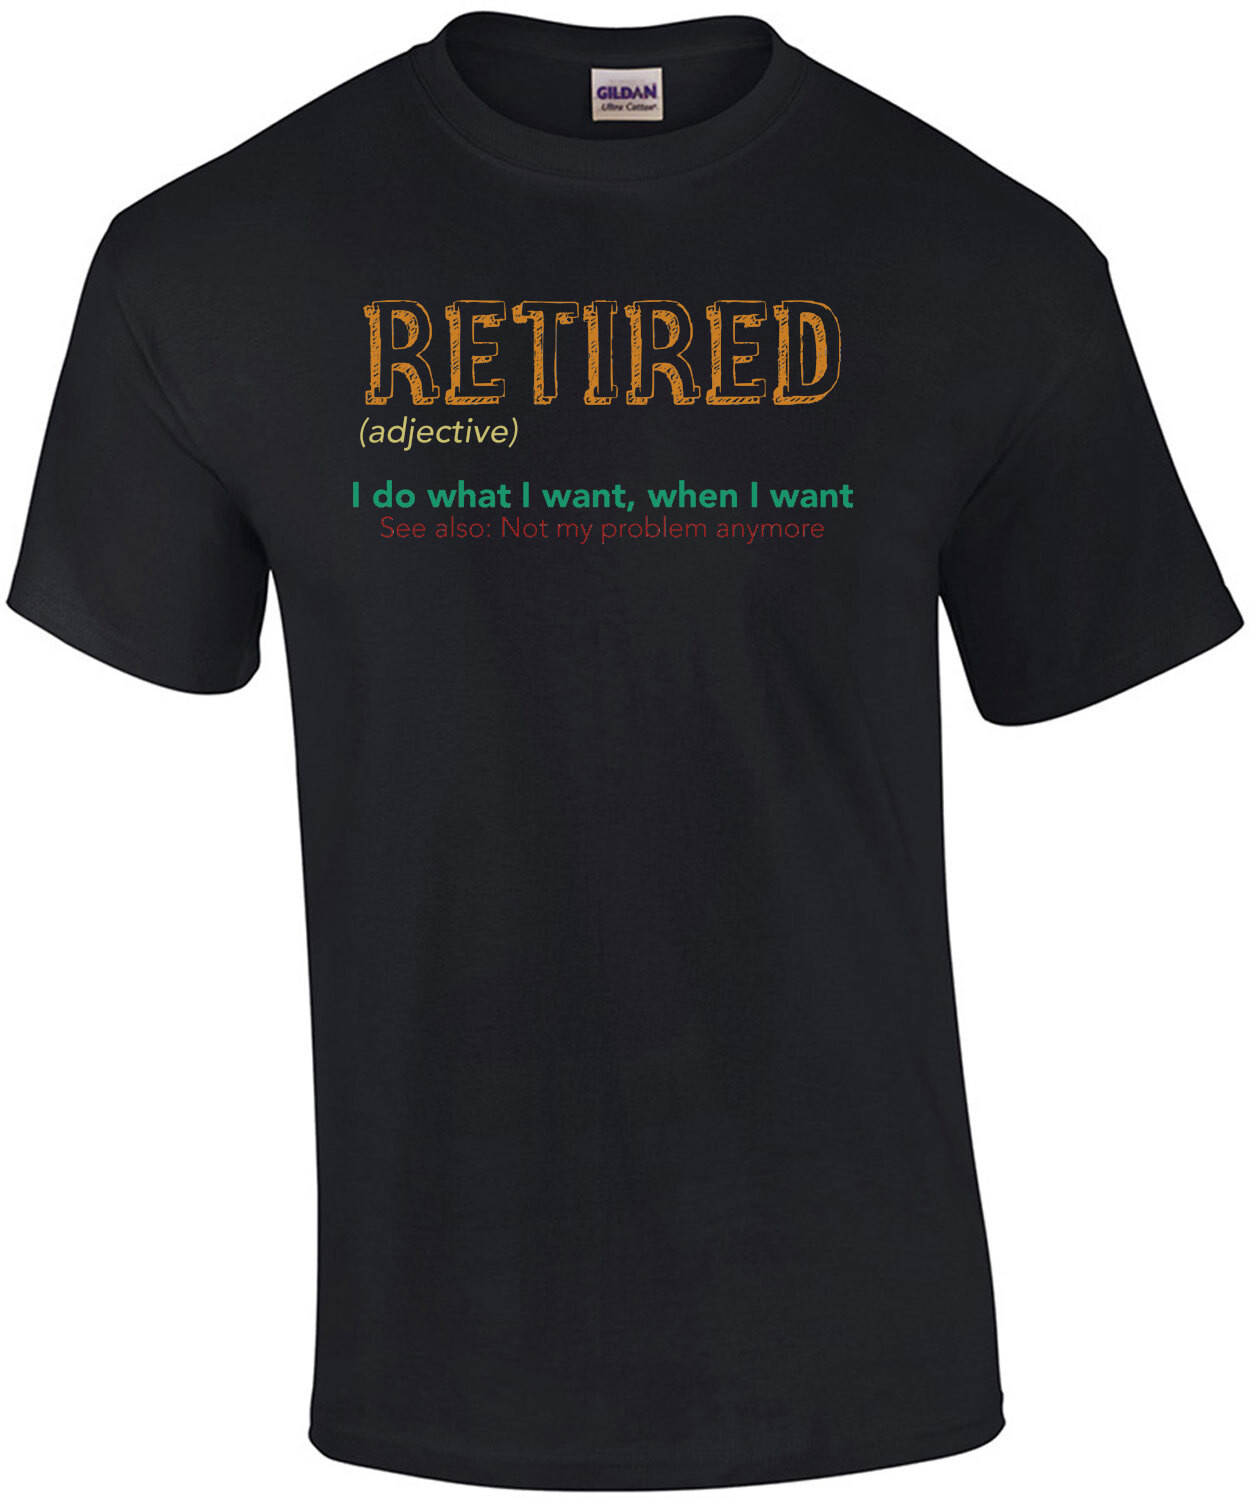 Retired (adjective) - I do what I want, when I want - See also: Not my problem anymore - funny retirement t-shirt 